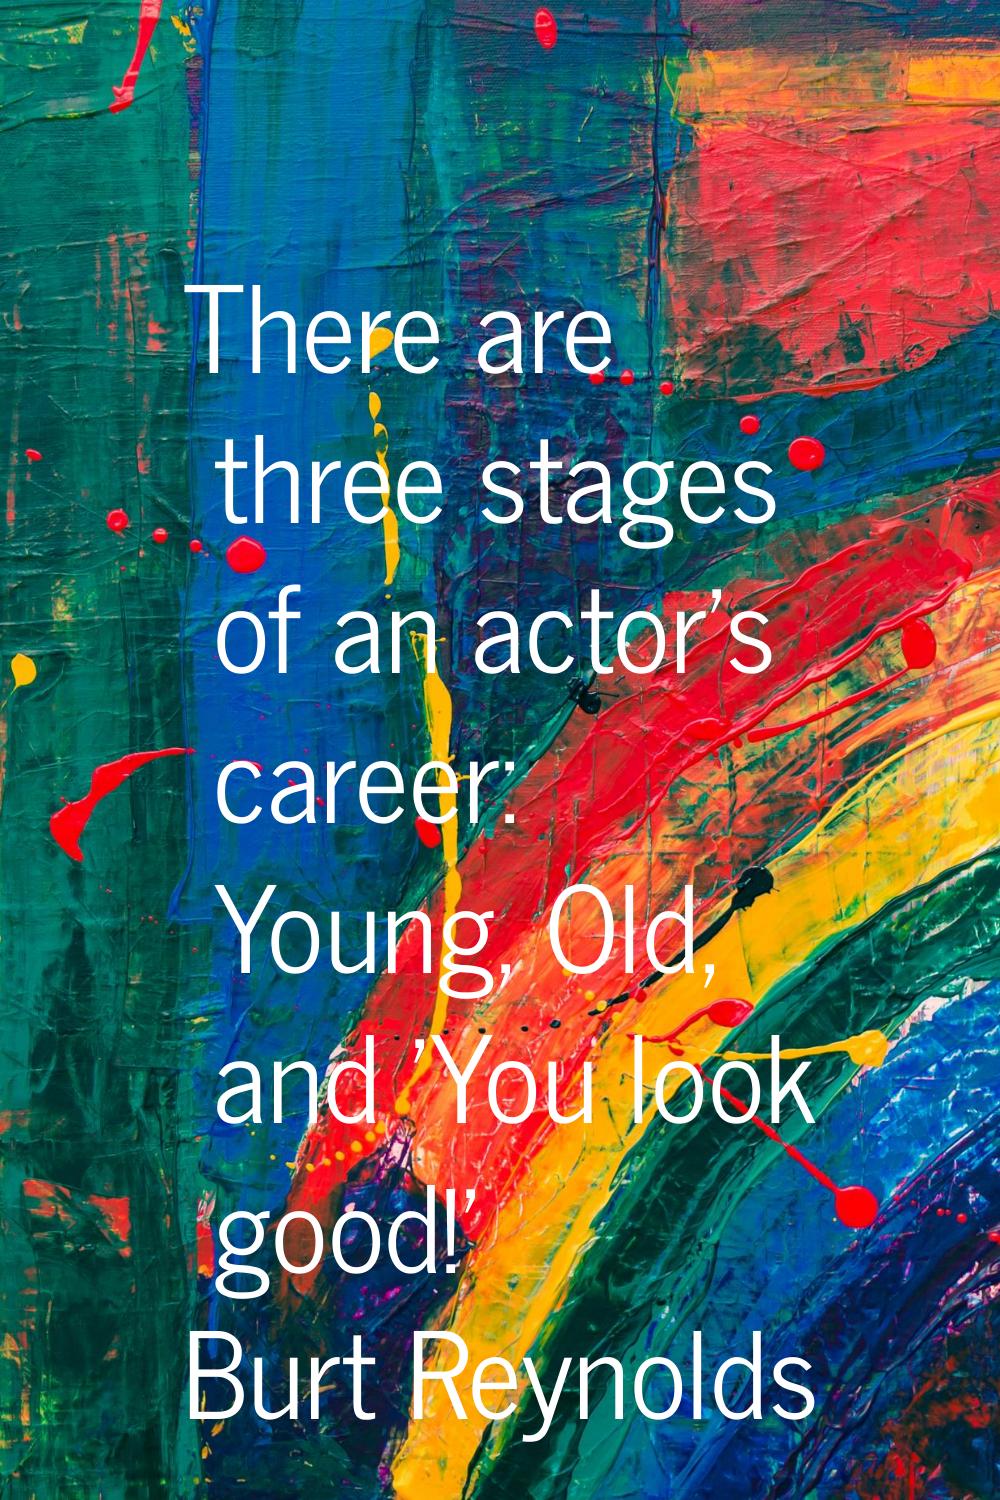 There are three stages of an actor's career: Young, Old, and 'You look good!'